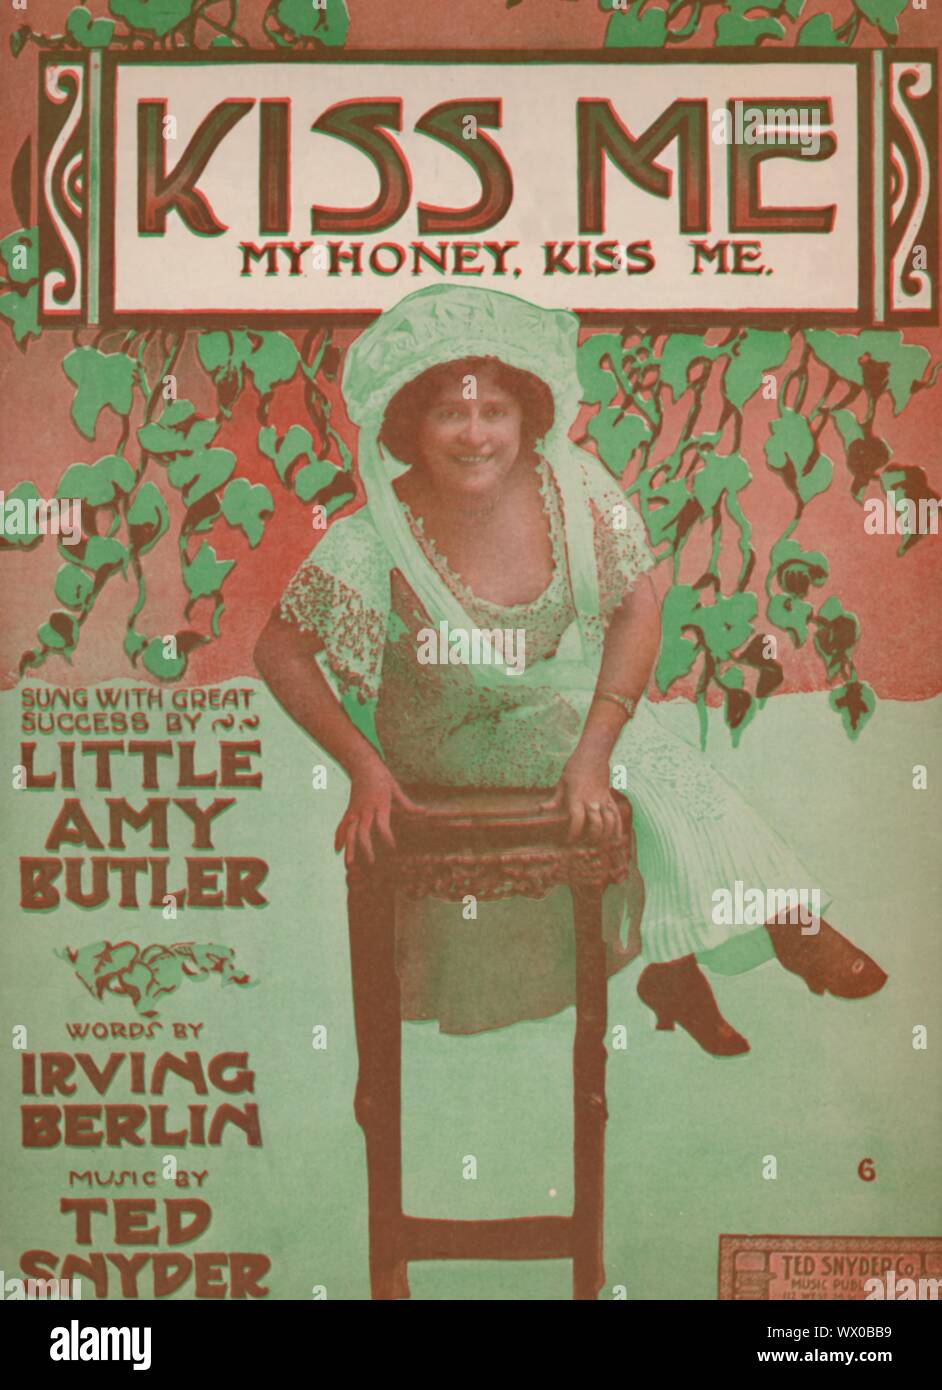 Kiss Me, My Honey, Kiss Me', 1910. 'Sung with great success by Little Amy  Butler'. Cover to sheet music for a song composed by Ted Snyder with lyrics  by Irving Berlin. [Ted